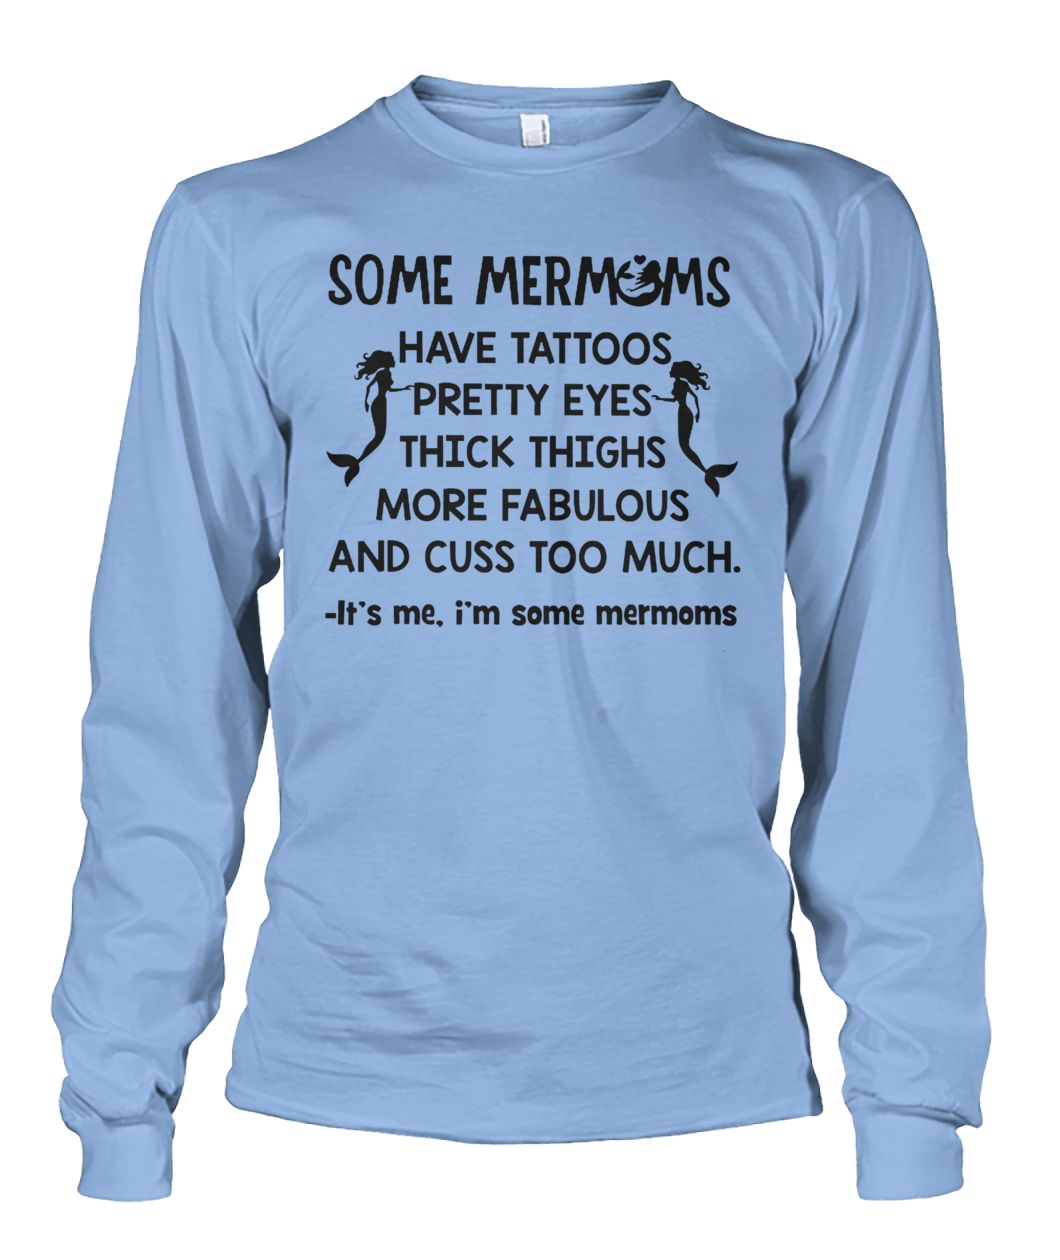 Some mermoms have tattoos pretty eyes thick thights more fabulous and cuss too much unisex long sleeve